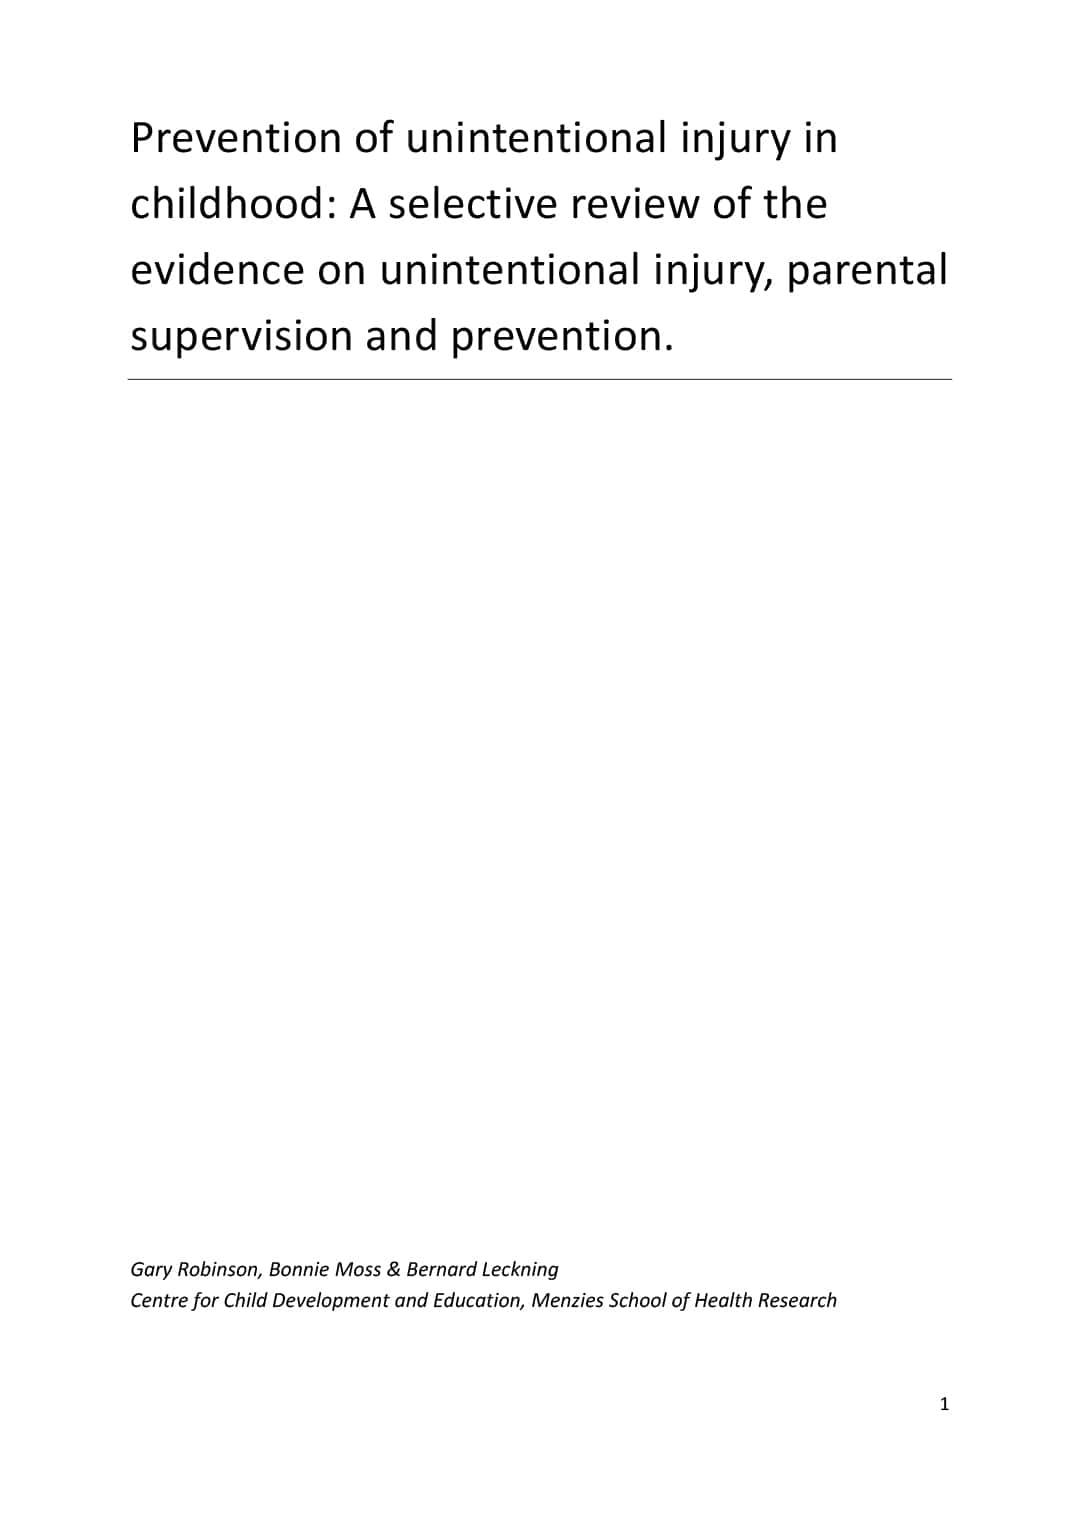 Prevention of Unintentional Injury in Childhood